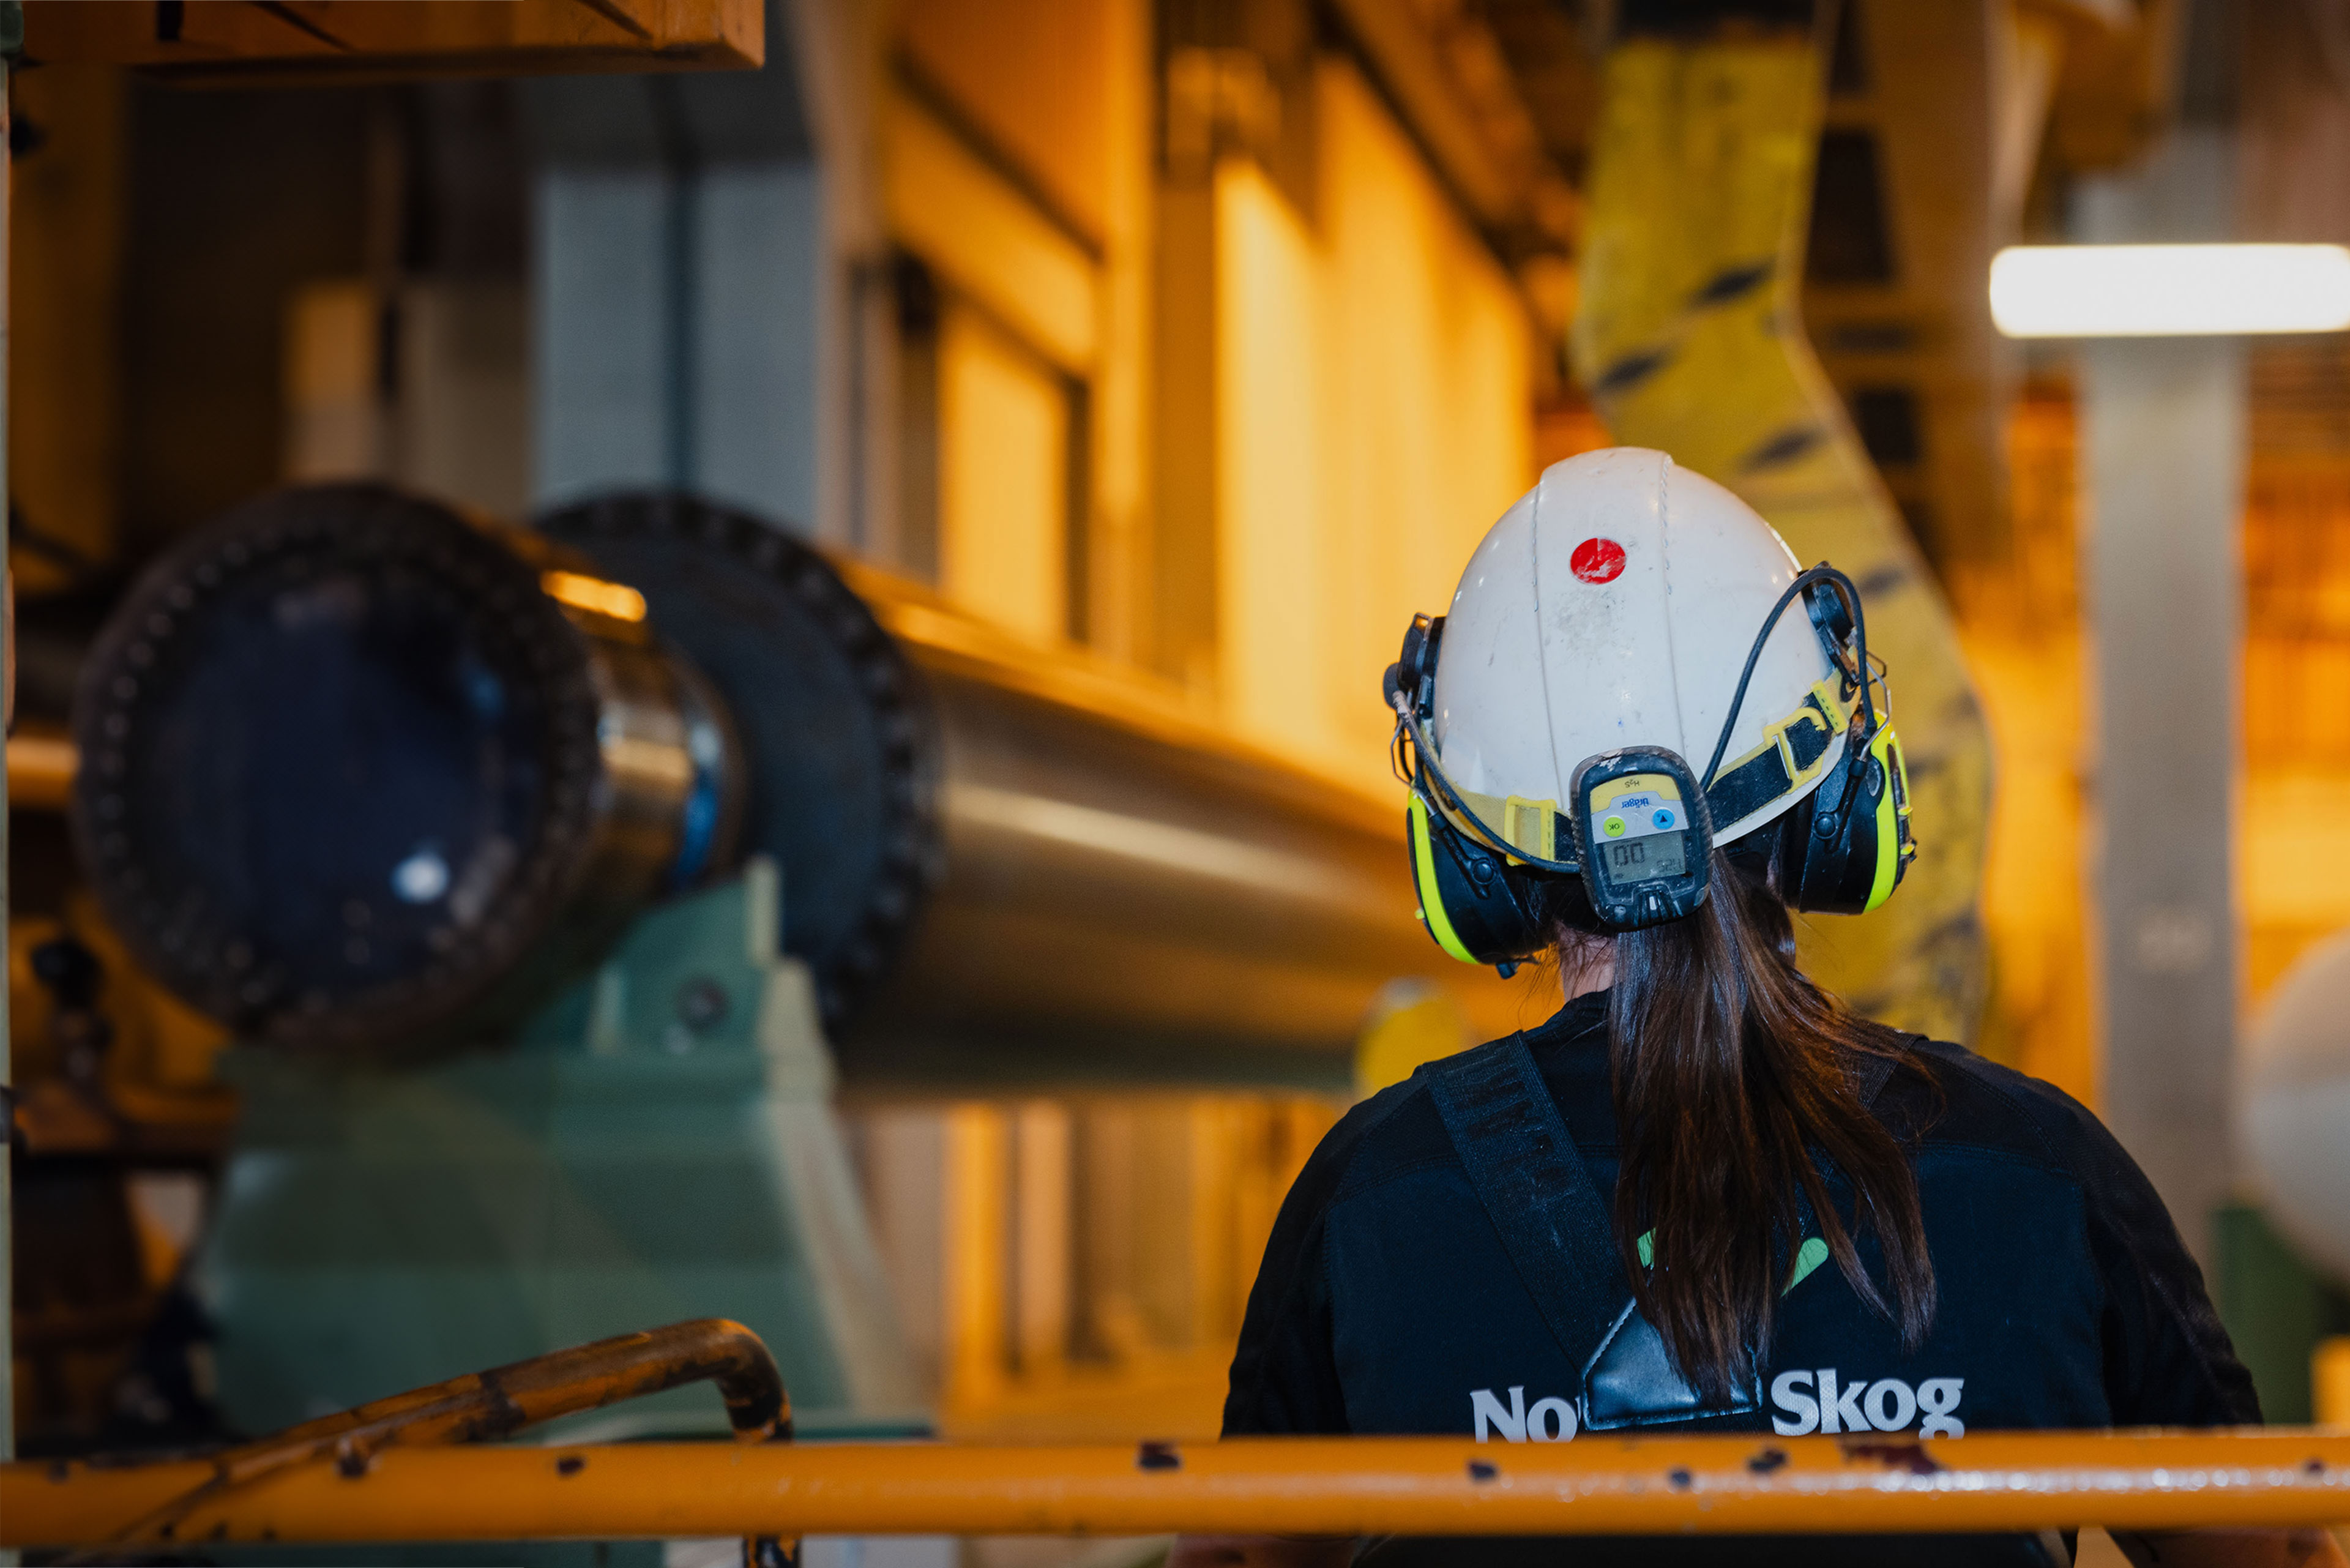 A worker with a helmet, hearing protection and a ponytail stands in front of industrial machinery at Norske Skog.